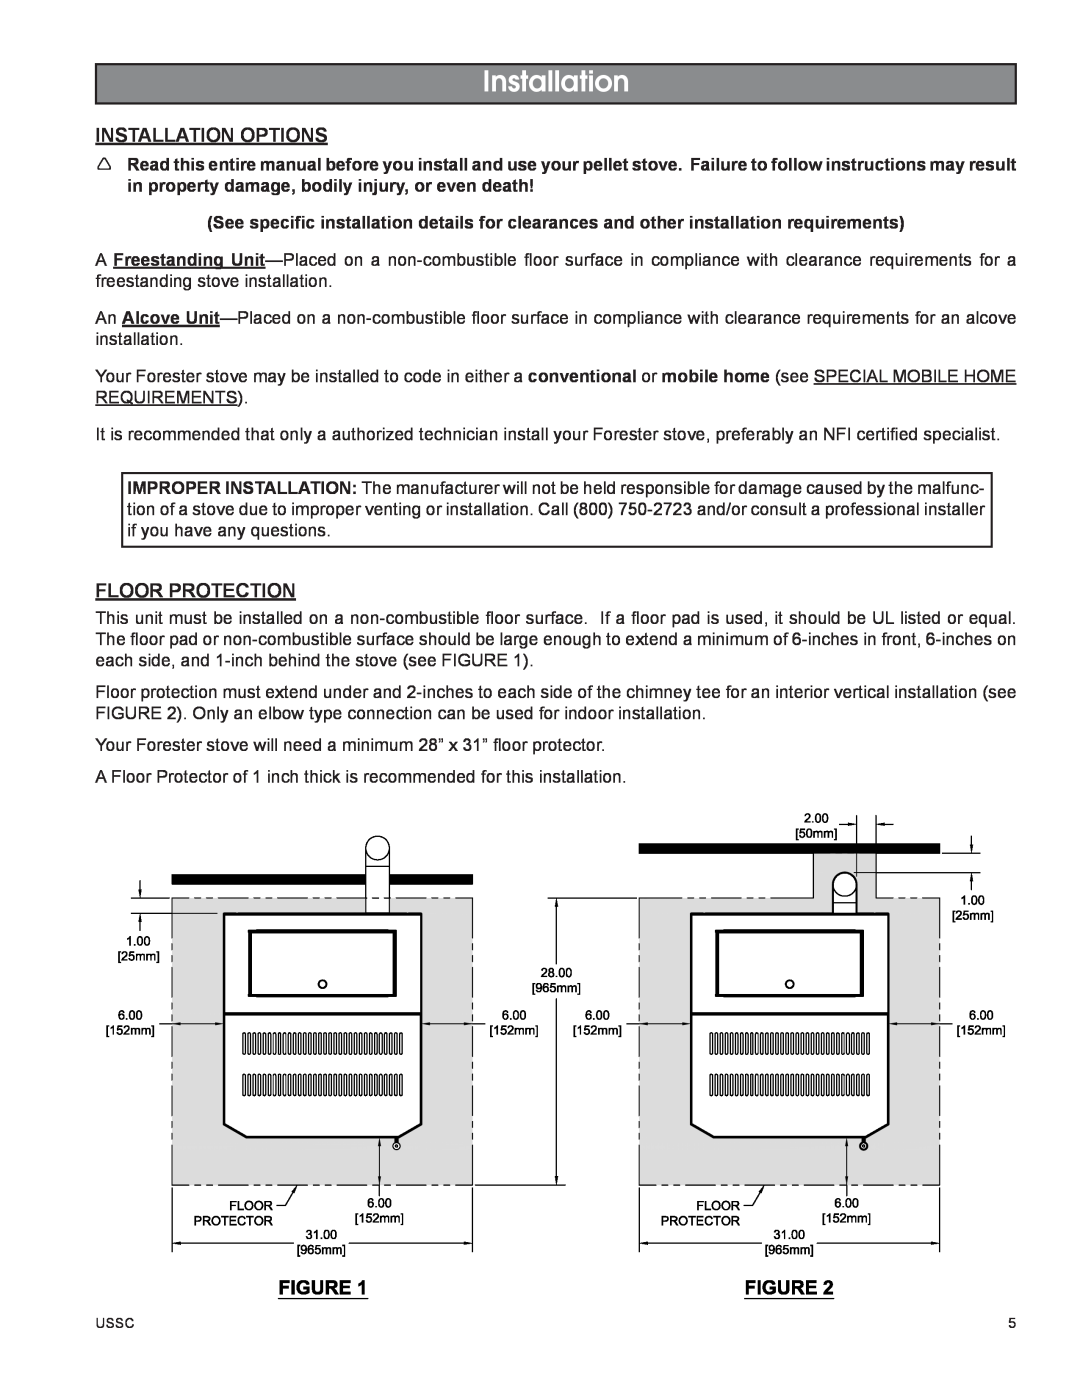 United States Stove 58242 owner manual Installation Options, Floor Protection 